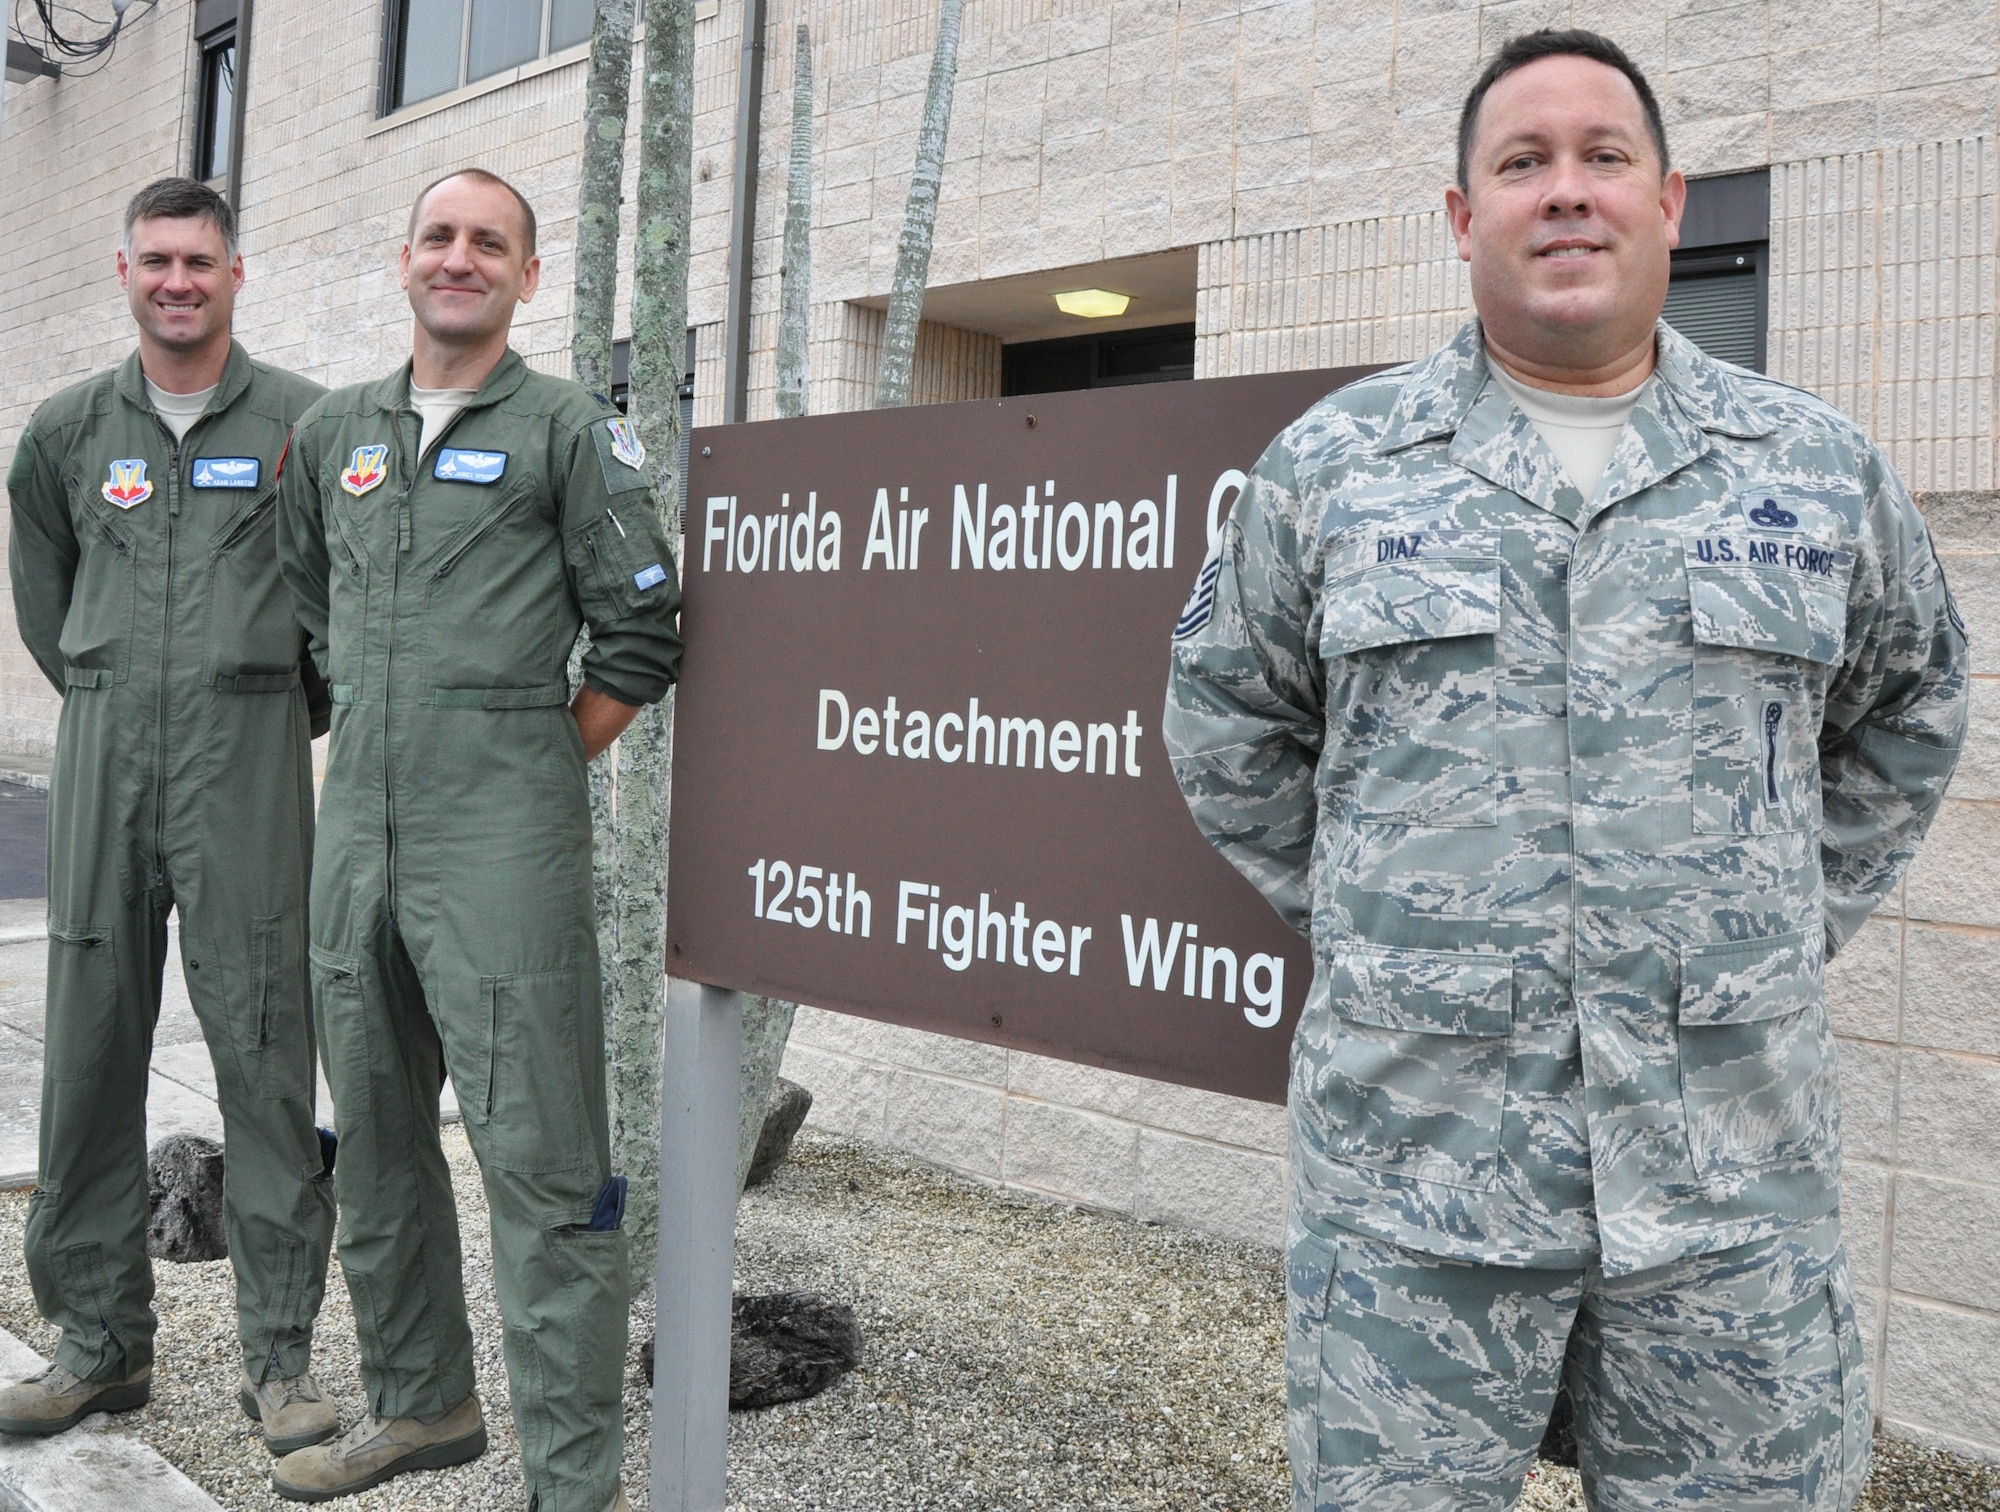 Leadership from the Florida Air National Guard's Det. 1, 25th Fighter Wing, based at Homestead Air Reserve Base in South Florida pose outside of their unit headquarters after their team helped score a "Mission Ready" rating on a recent NORAD inspection. Pictured are Maj. Adam Langton (left), Commander Lt. Col. James Spooner, and Chief Enlisted Manager Senior Master Sgt. Eddie Diaz. Photo by Master Sgt. Thomas Kielbasa